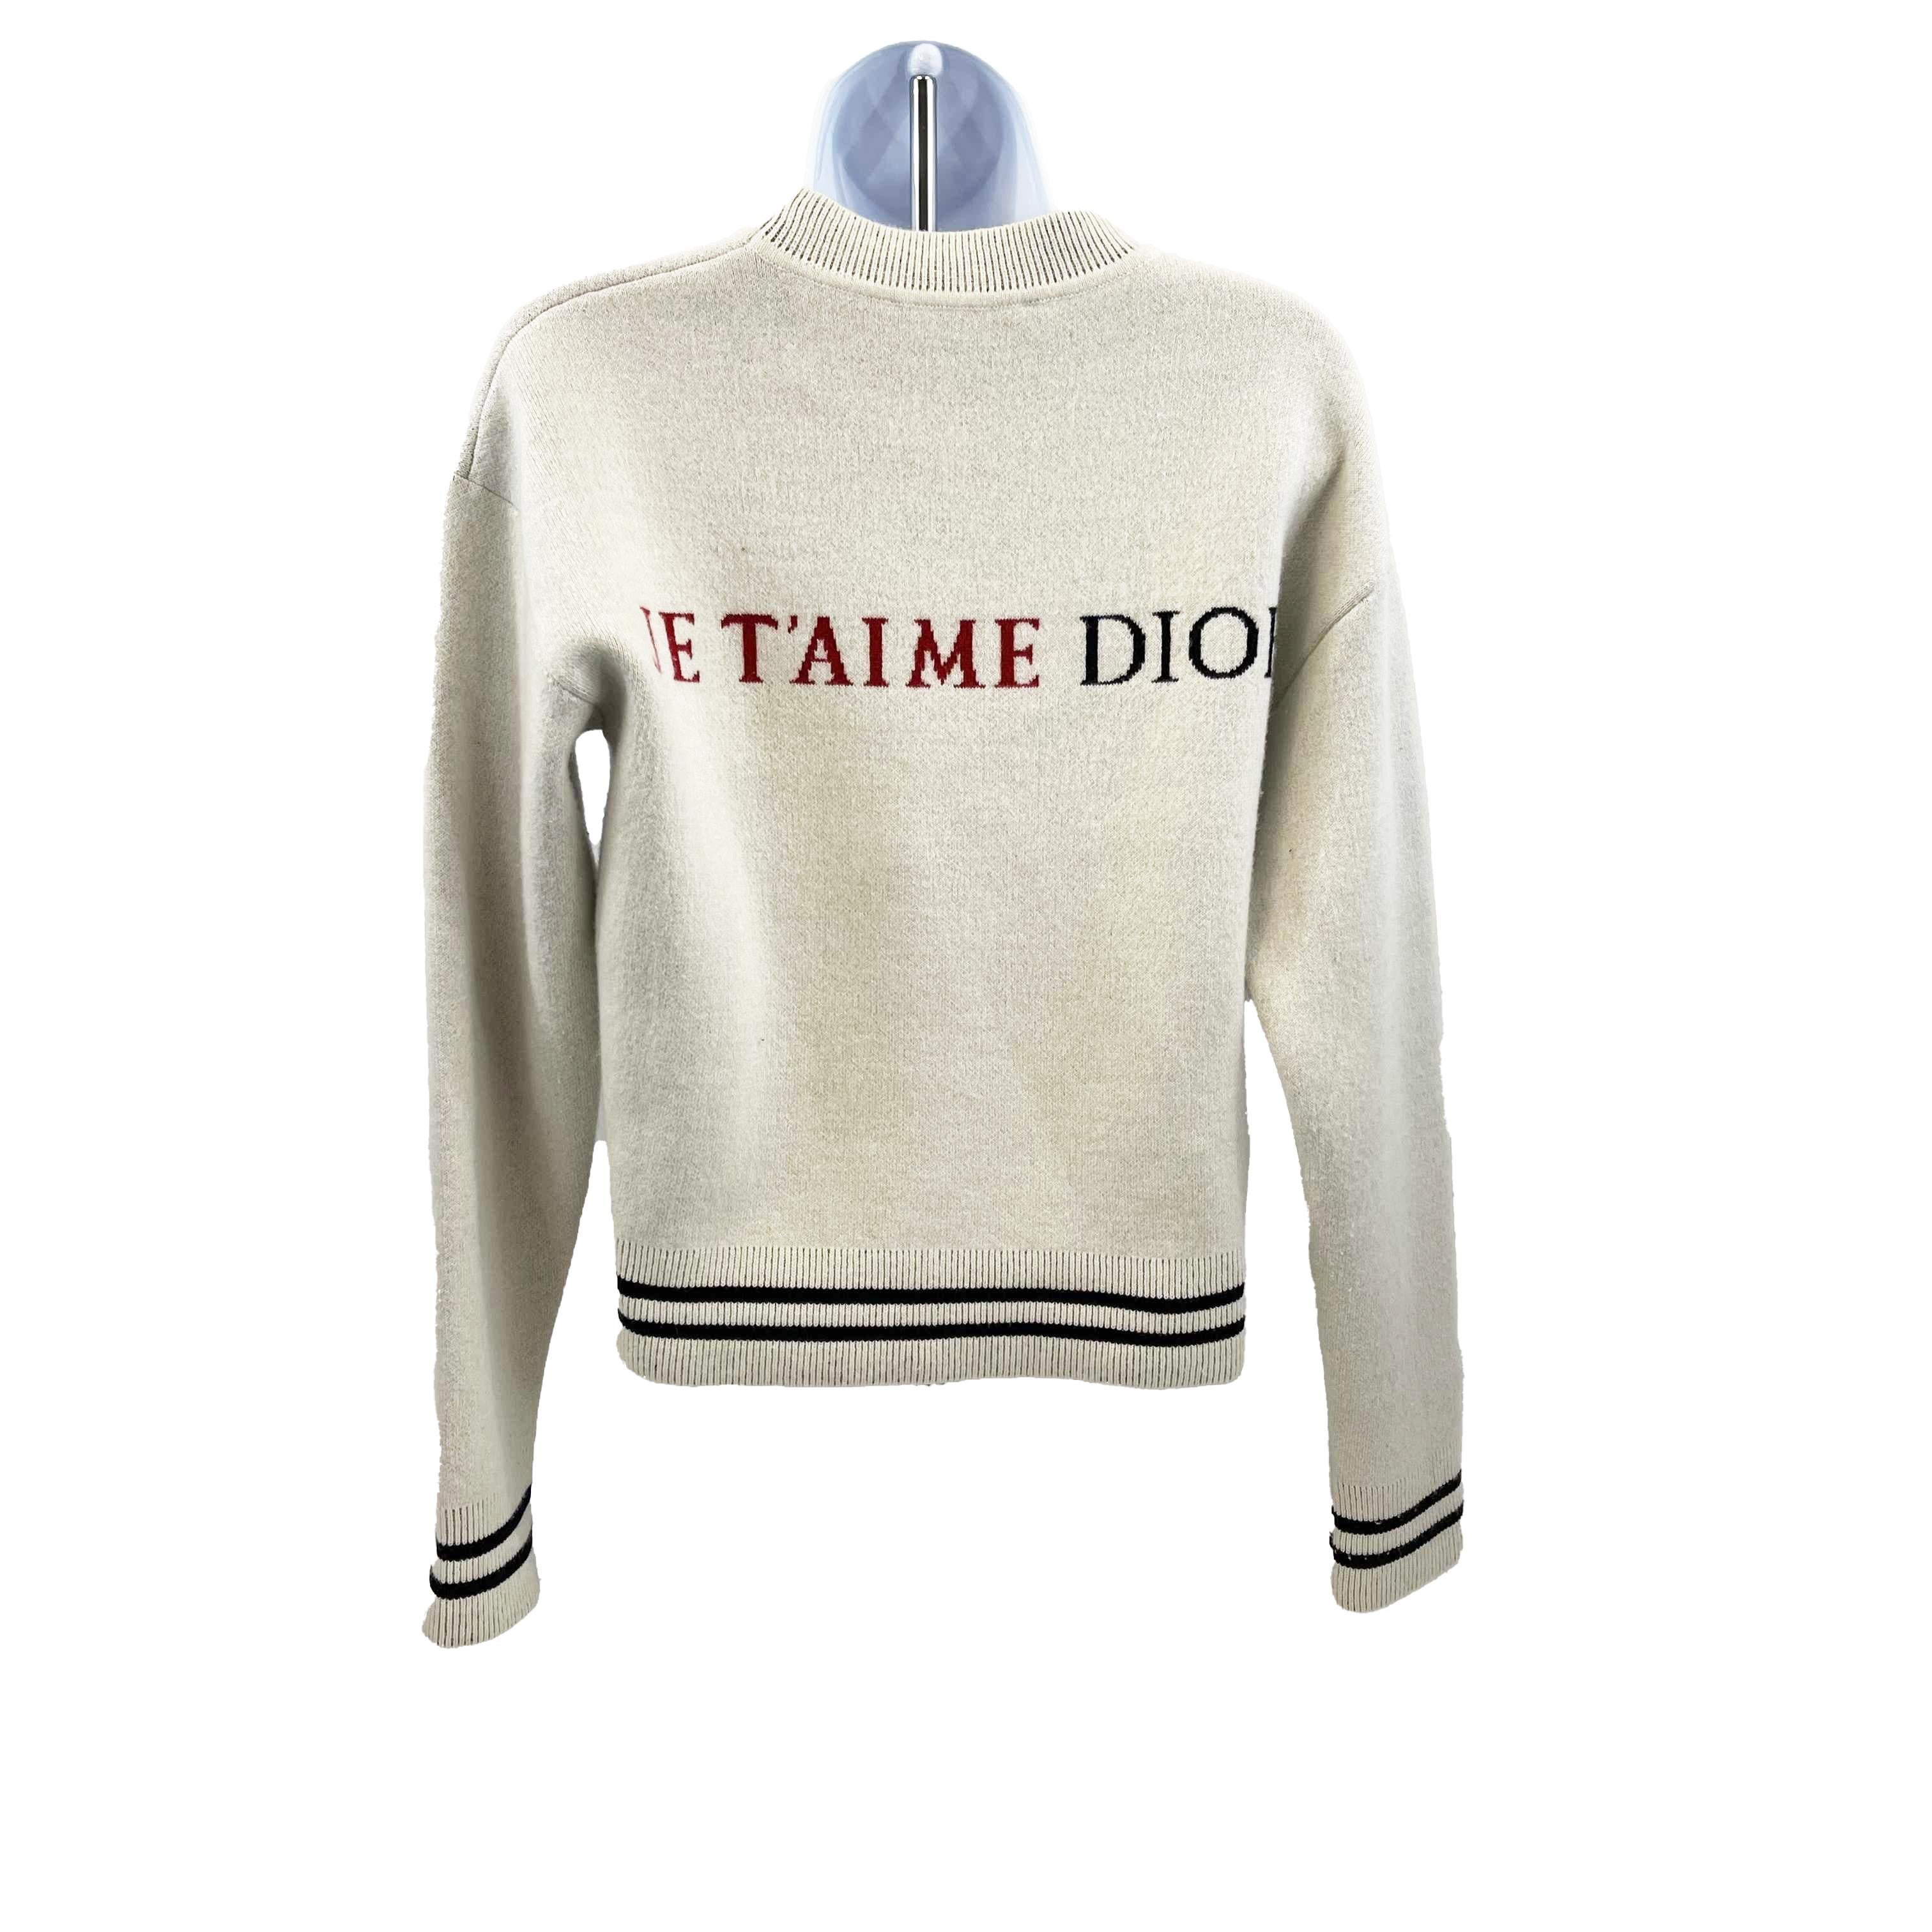 Christian Dior 2019 Dioramour Capsule Collection Sweater Ivory 34 US 2 2